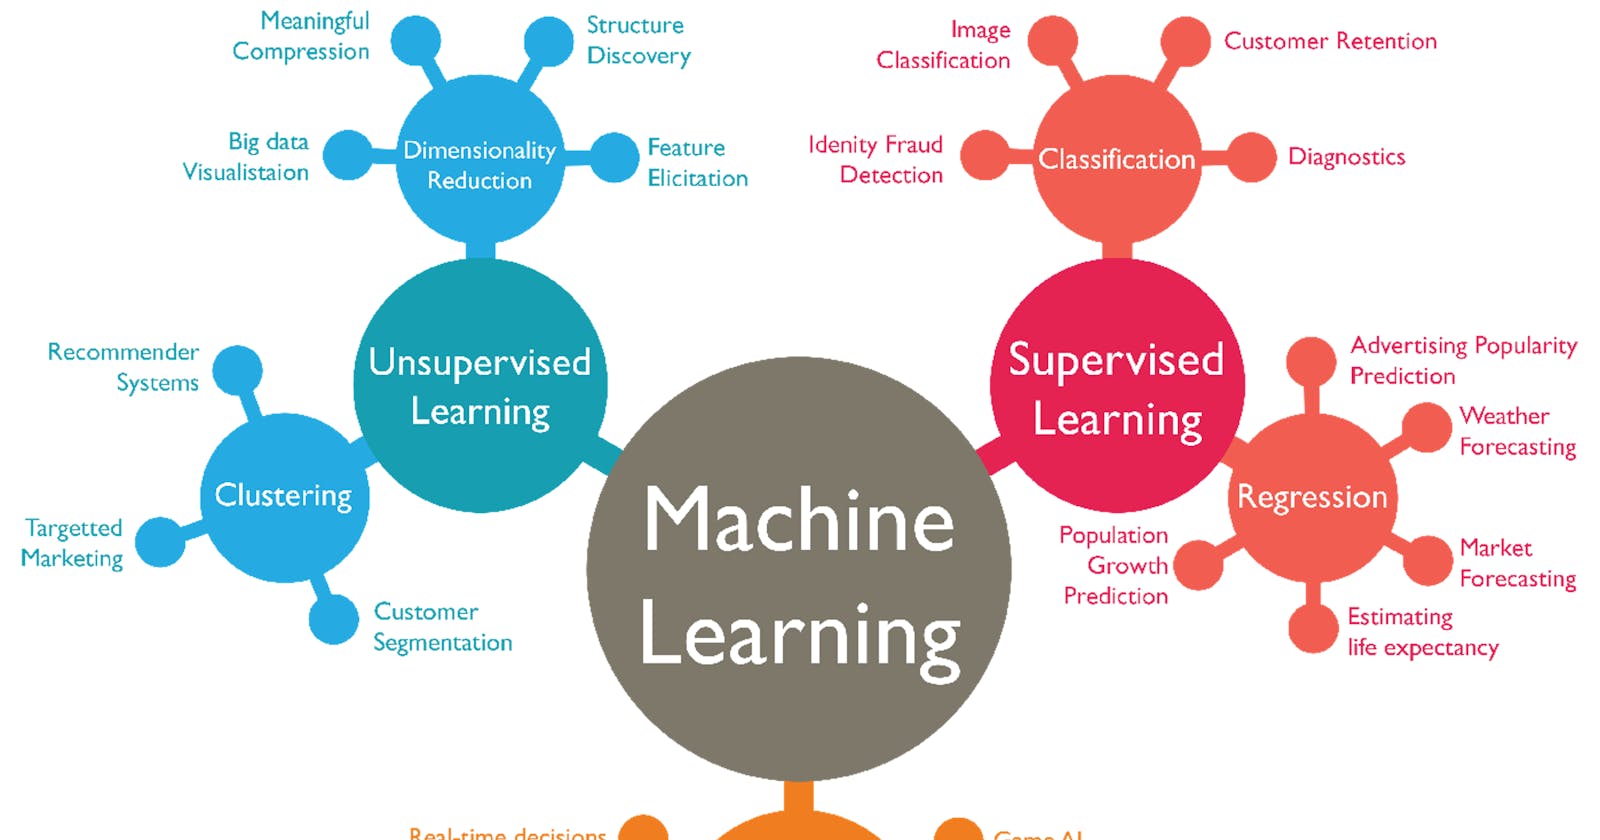 Use Cases of All Machine Learning Algorithms